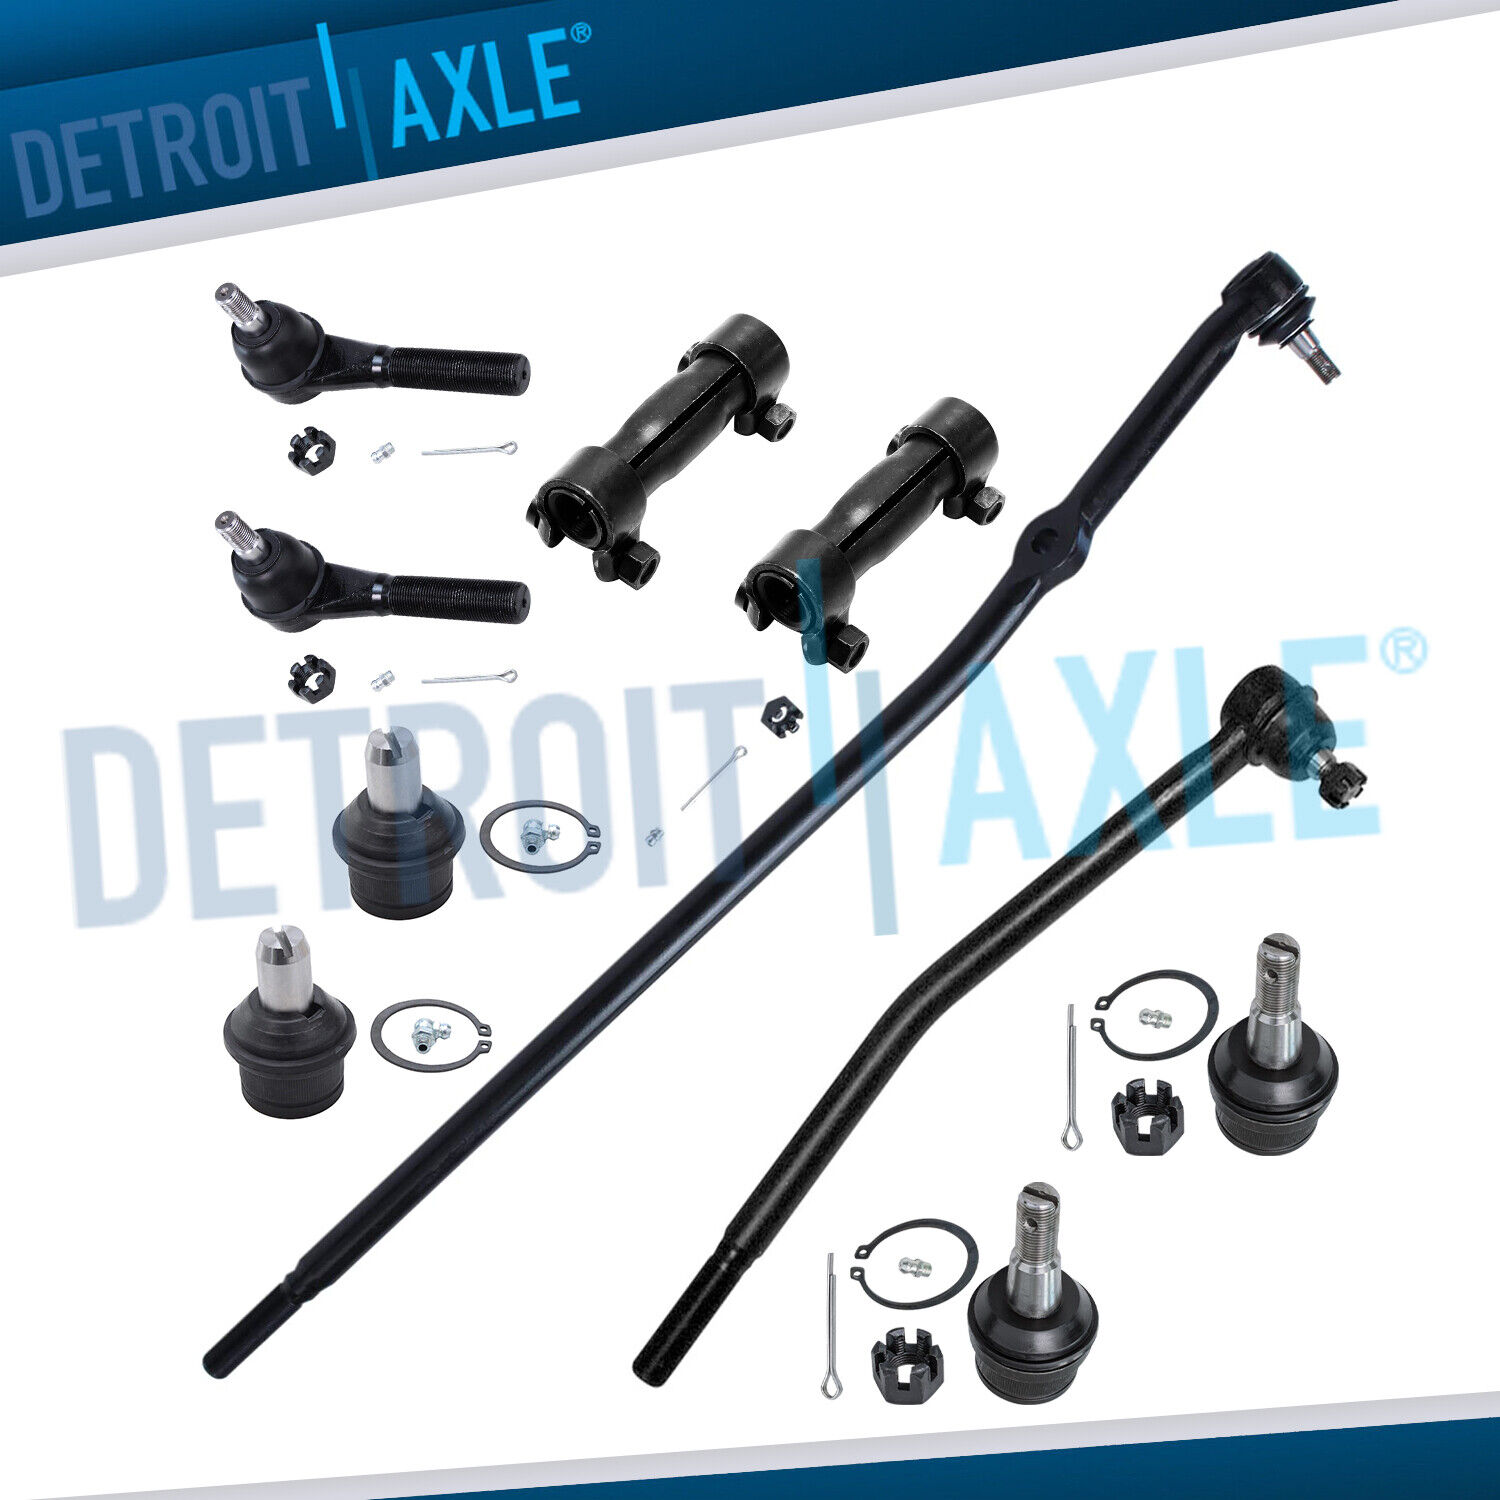 New 10pc Complete Front Suspension Kit for Ford E-150 Econoline